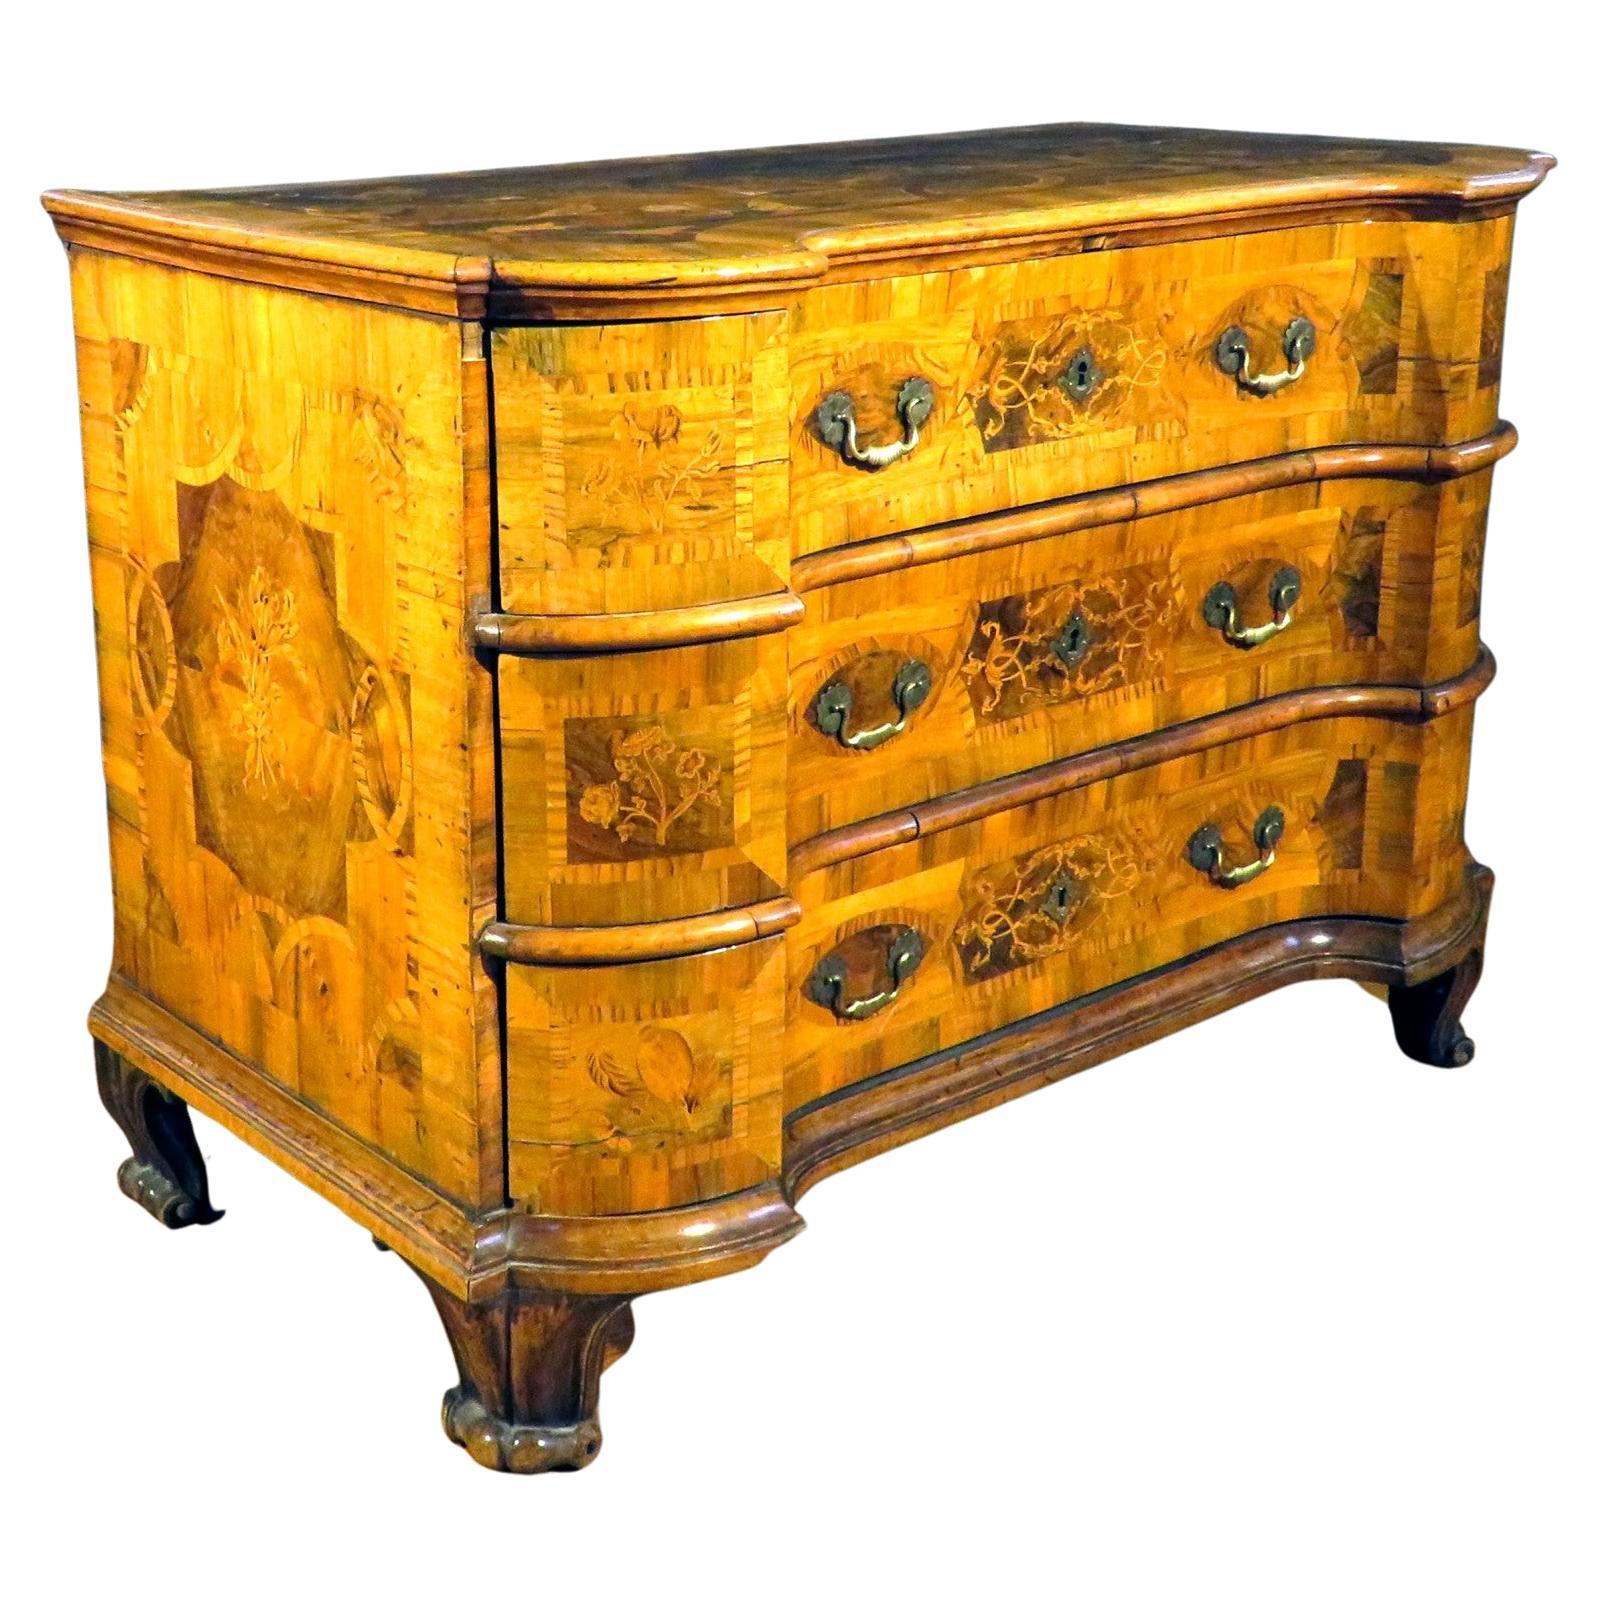 An Exceptional 18th Century Inlaid Fruitwood German Baroque Commode, Circa 1740